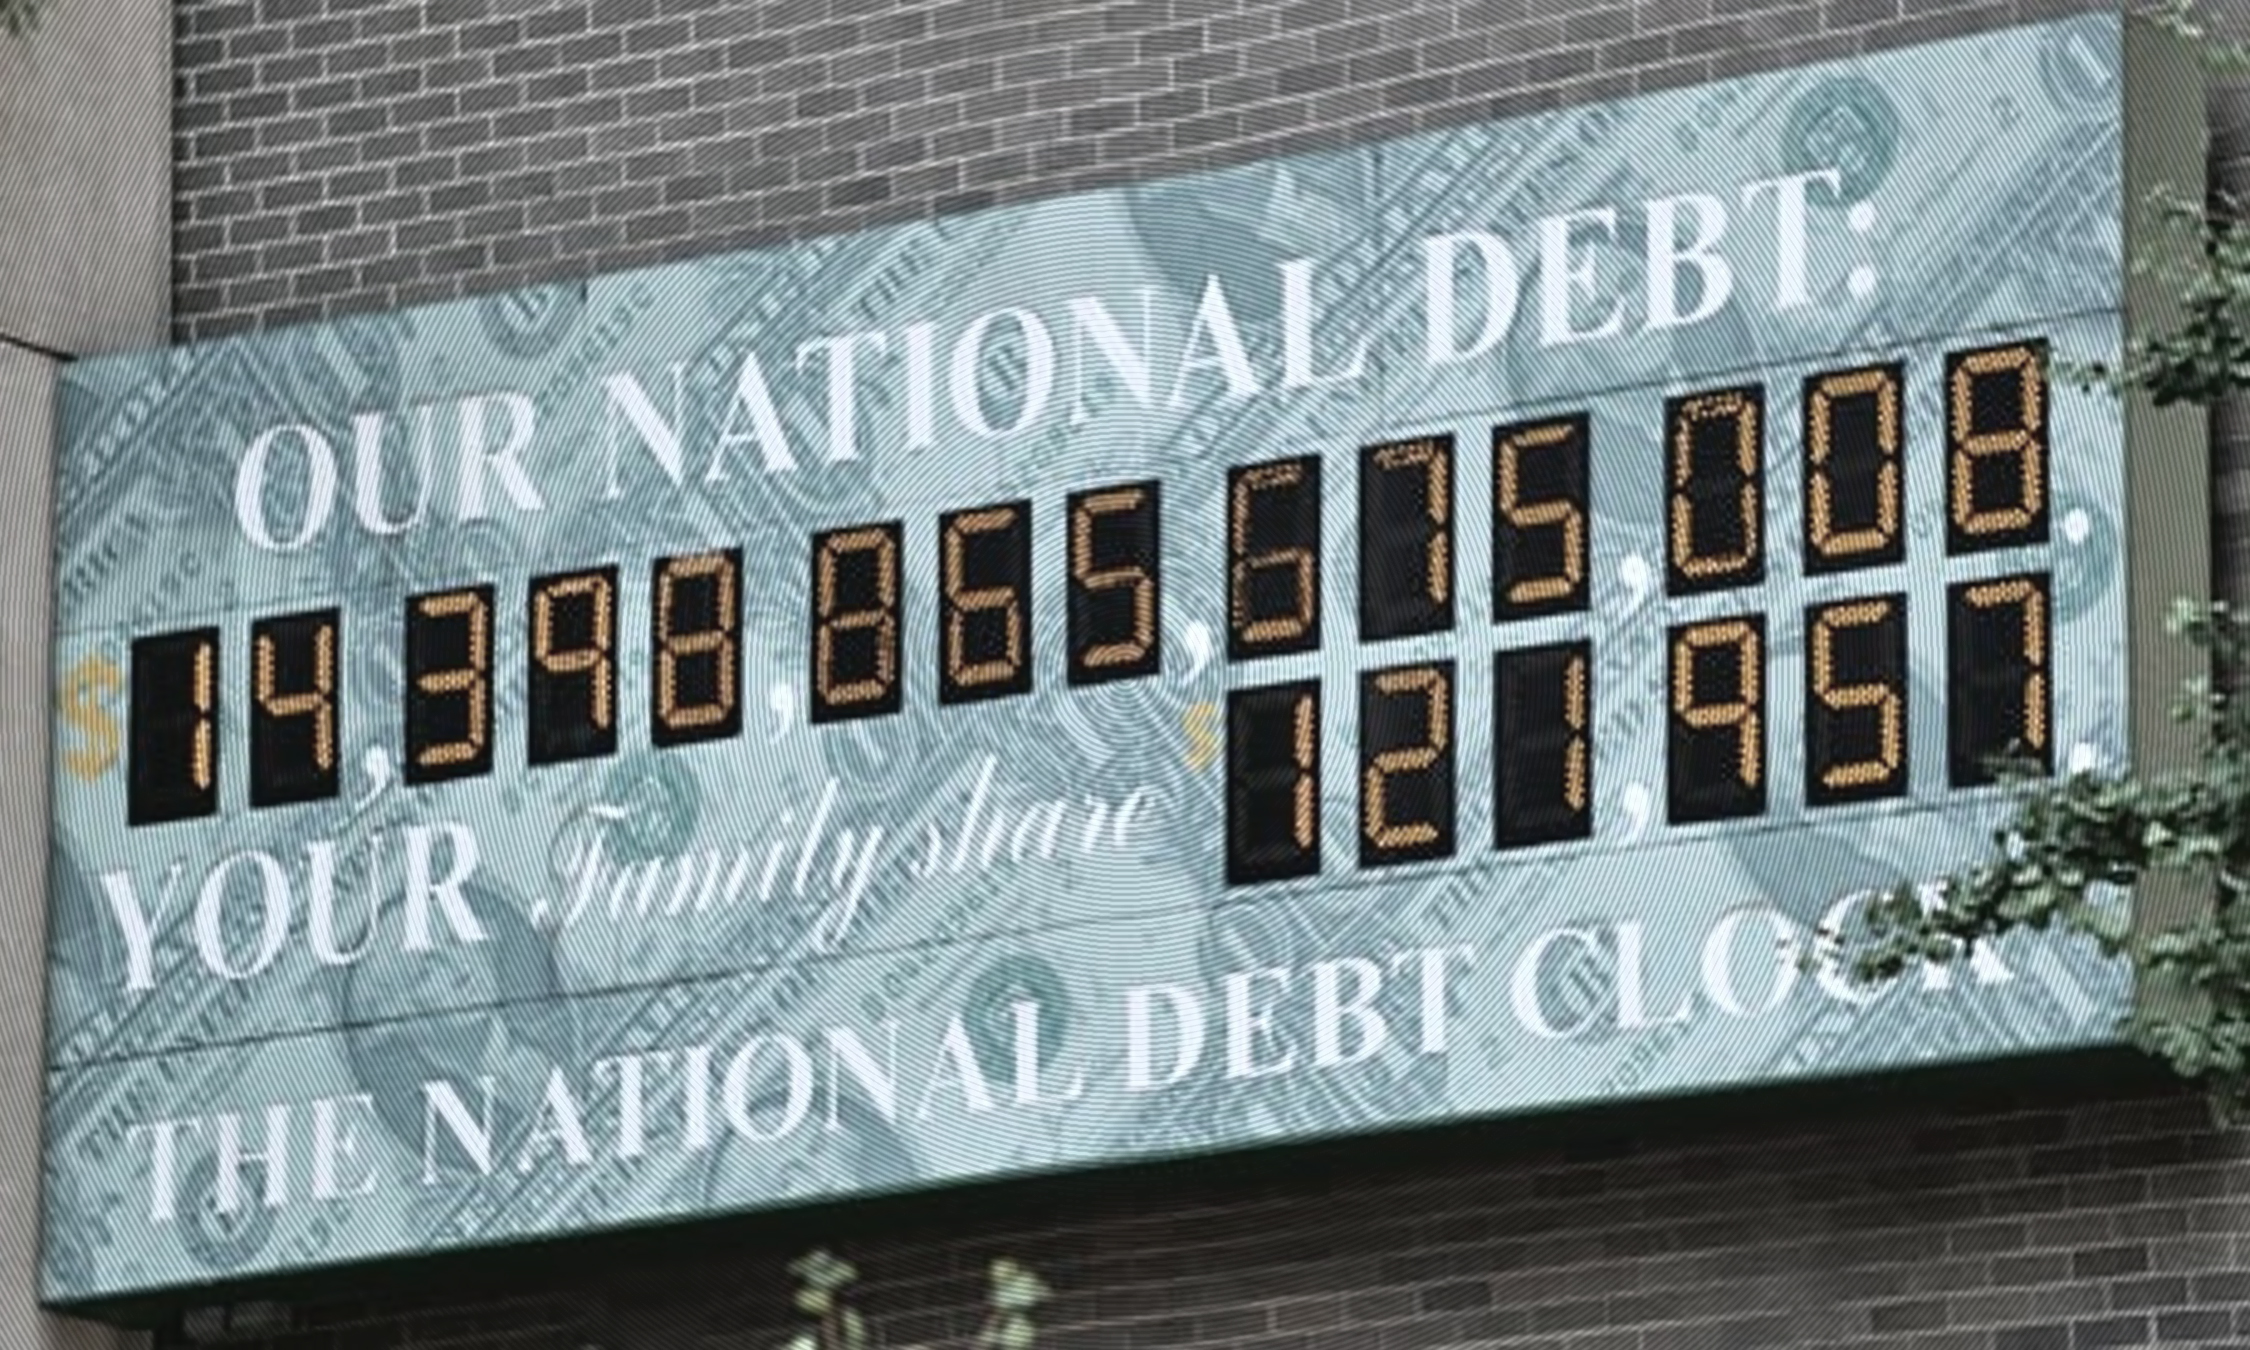 The nation’s debt is the people’s wealth.